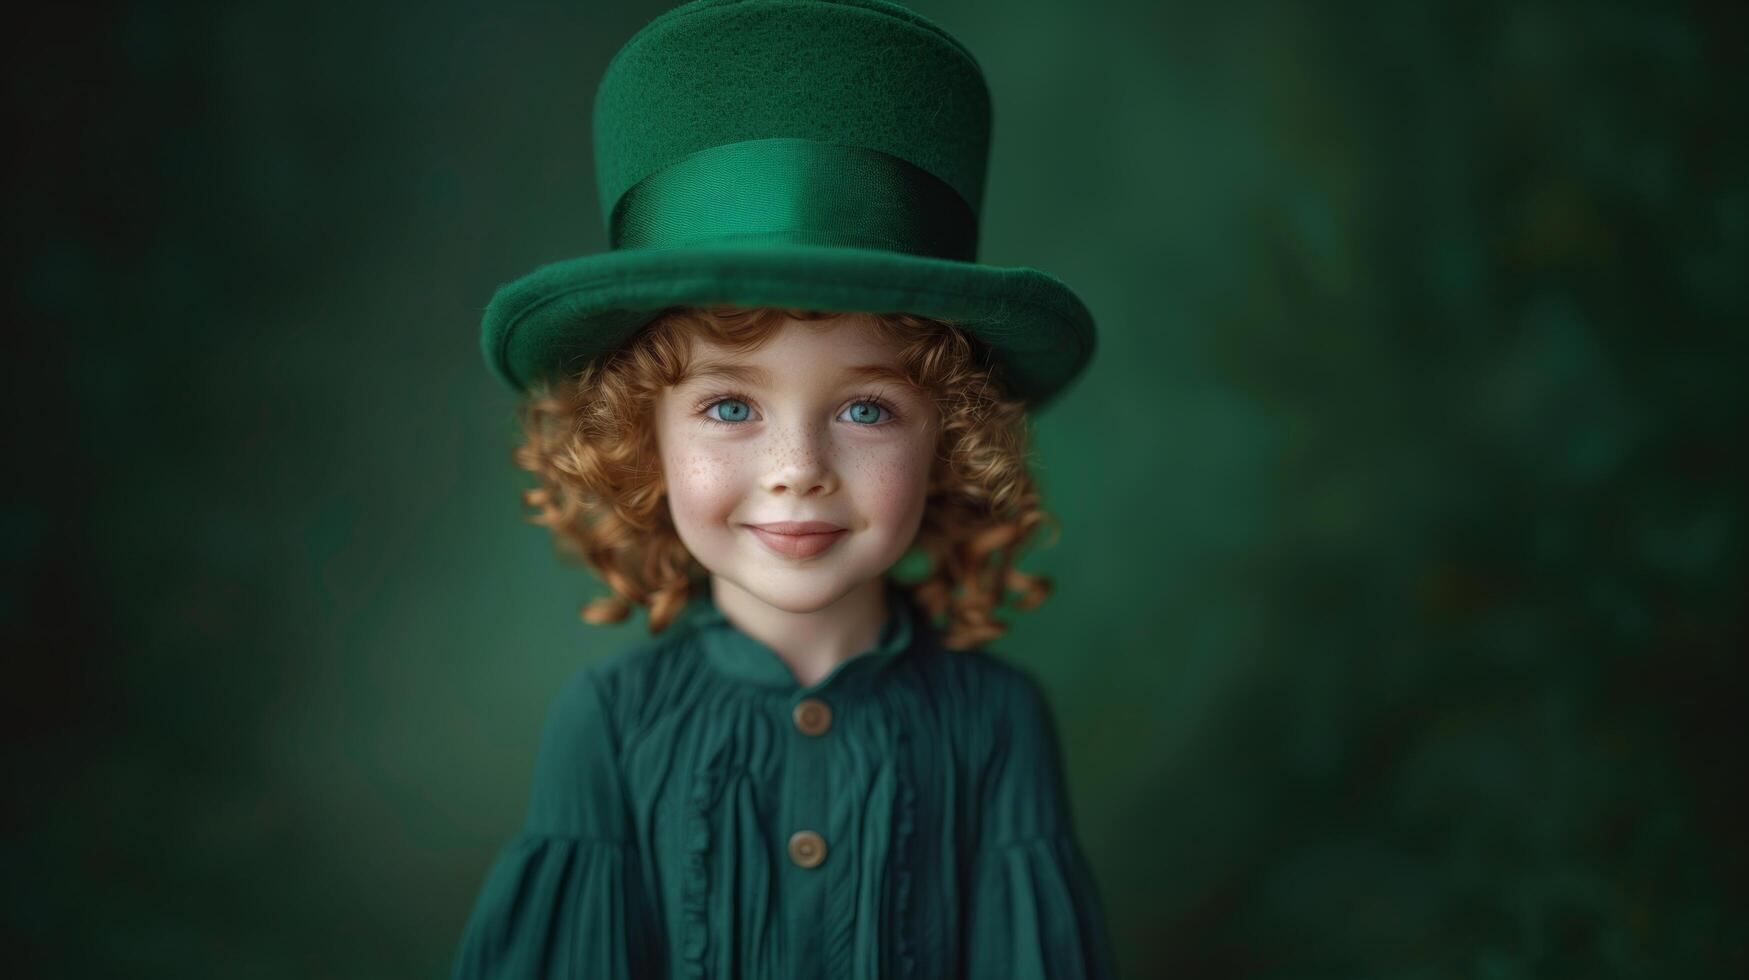 AI generated Portrait of a little girl with curly hair in a green top hat. Lucky green hat for st. patricks day. photo